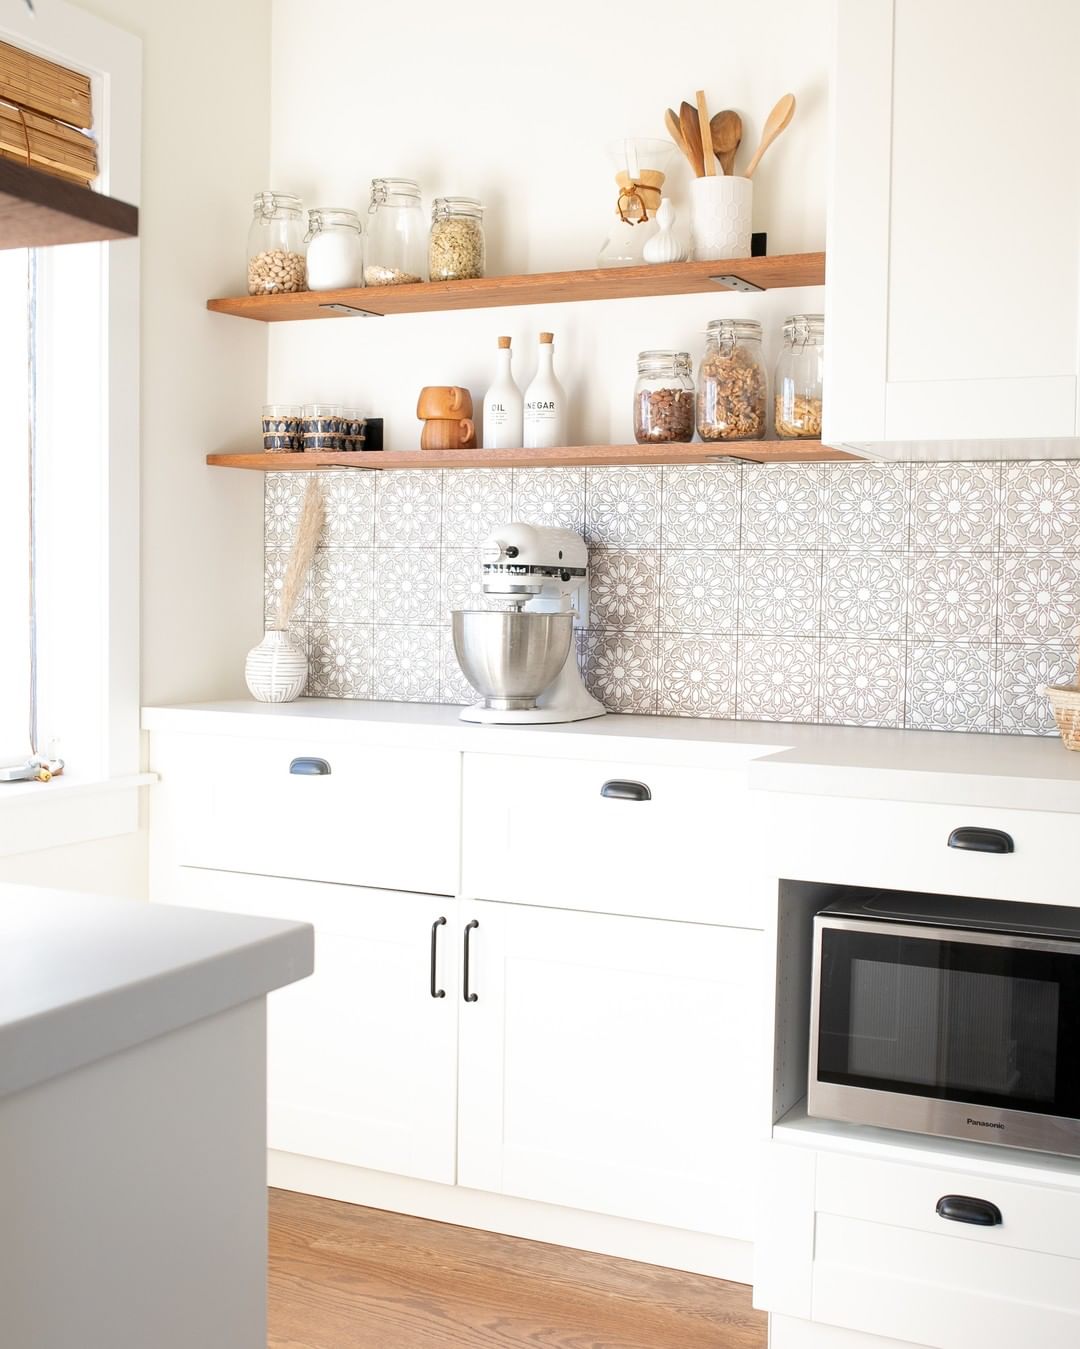 Clean White Kitchen with Minimal Items on Counter. Photo by Instagram user @amanda_holstein